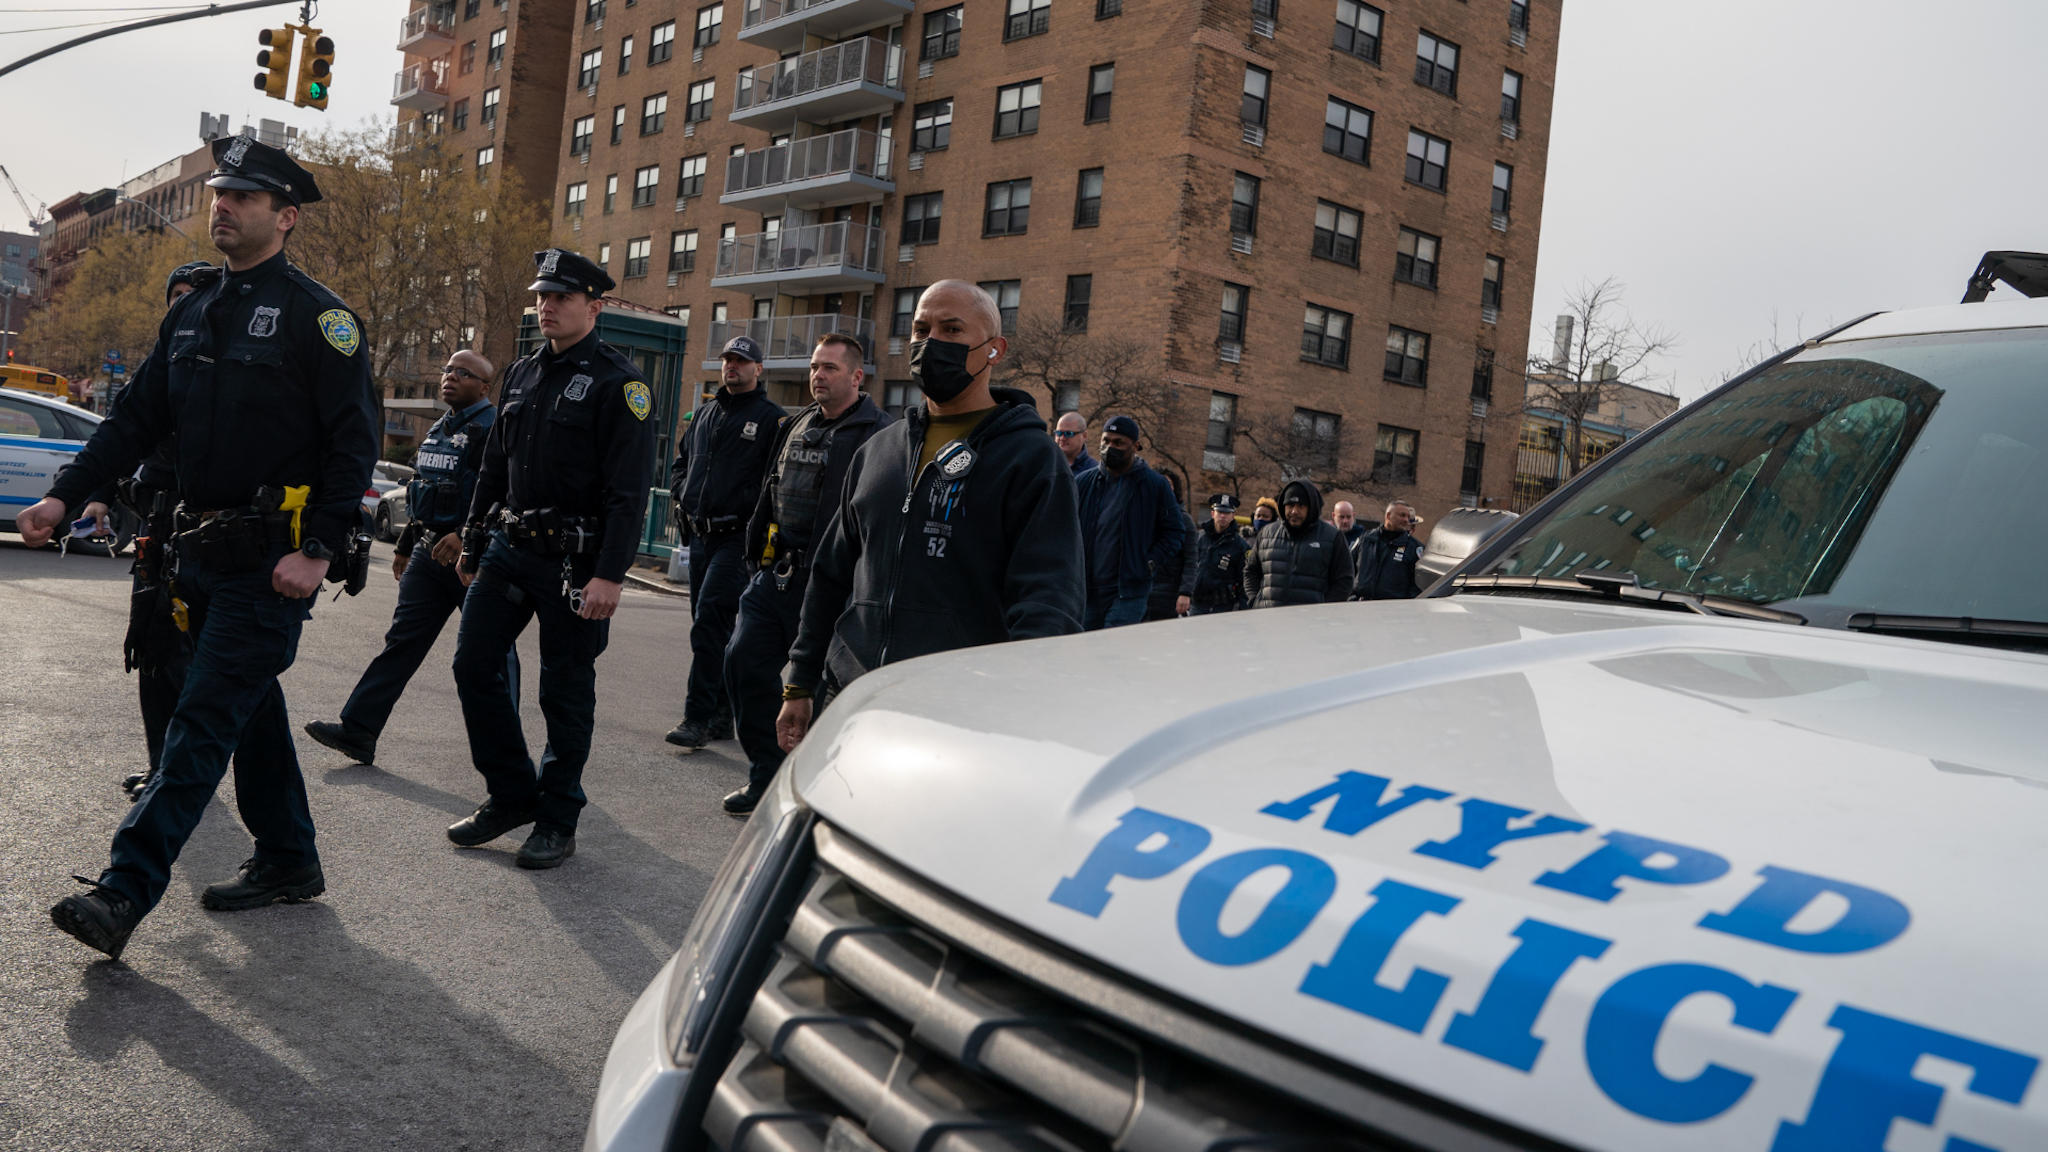 Police officers walk from the NYPD 32nd Precinct to Harlem Hospital near the scene where two officers where gunned down on January 23, 2022 in New York City. Officer Jason Rivera was killed in the attack. Officer Wilbert Mora was wounded and remains hospitalized.